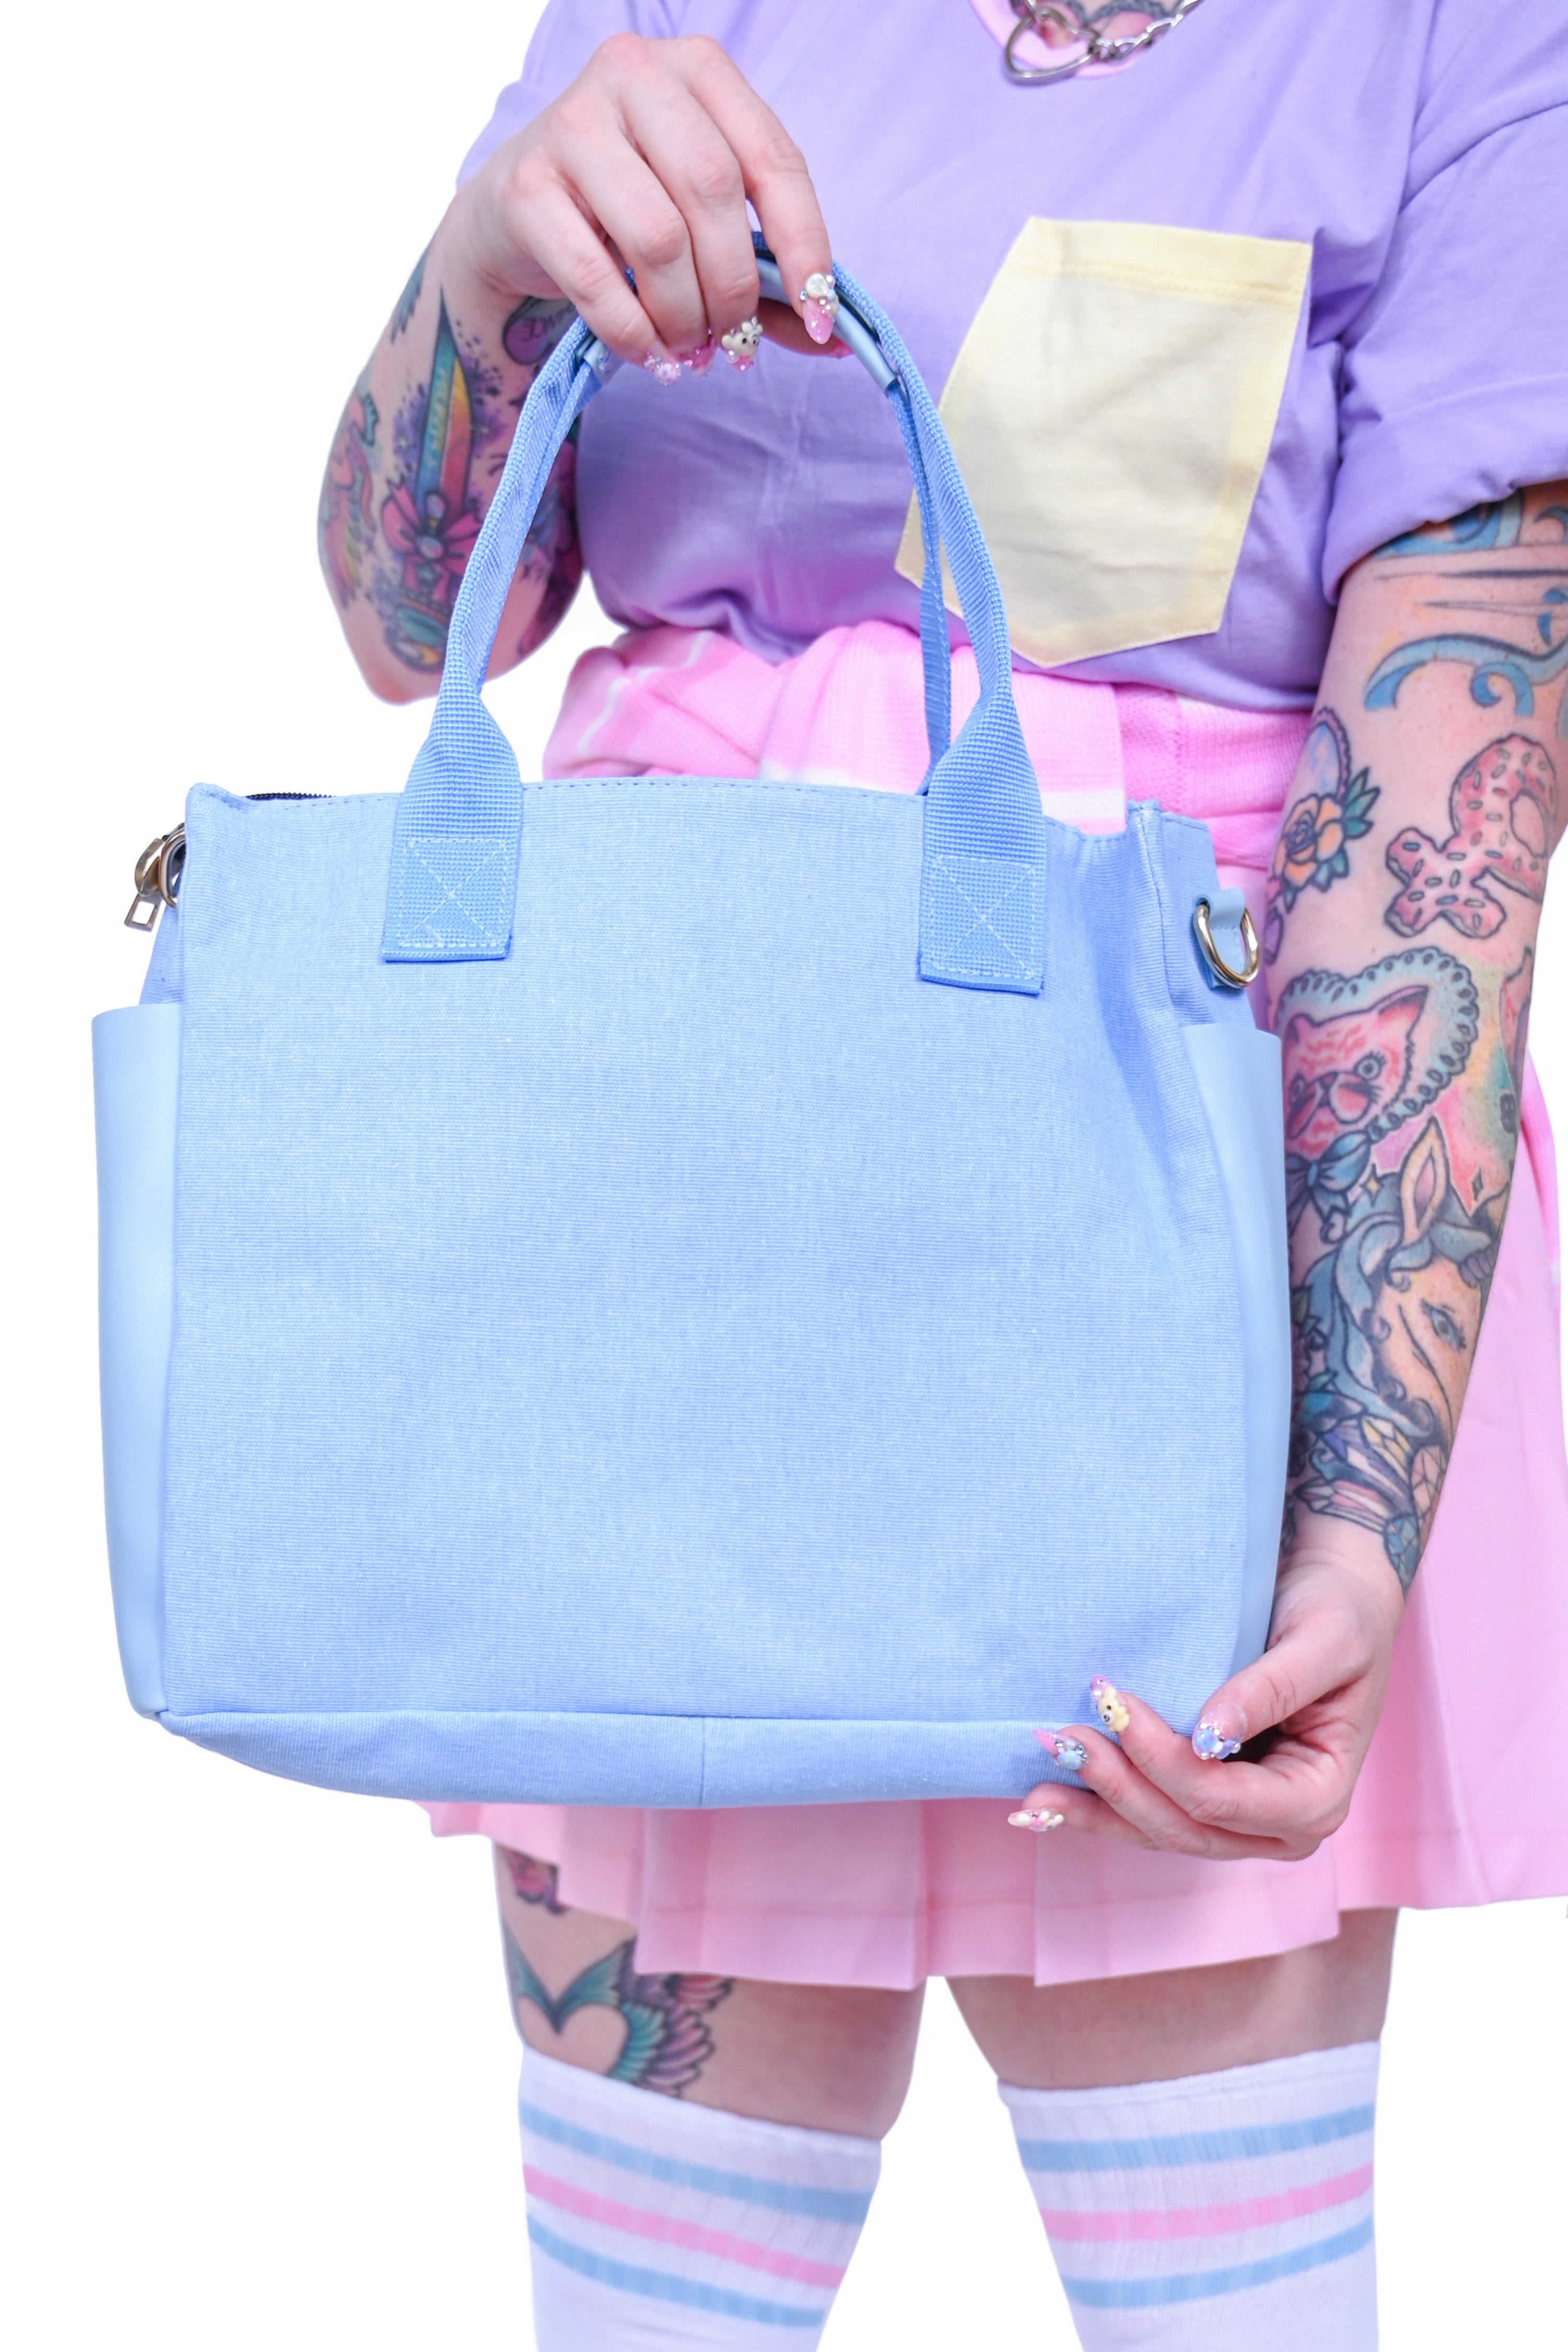 Rectangular blue bag with large outer pockets and two sturdy canvas straps